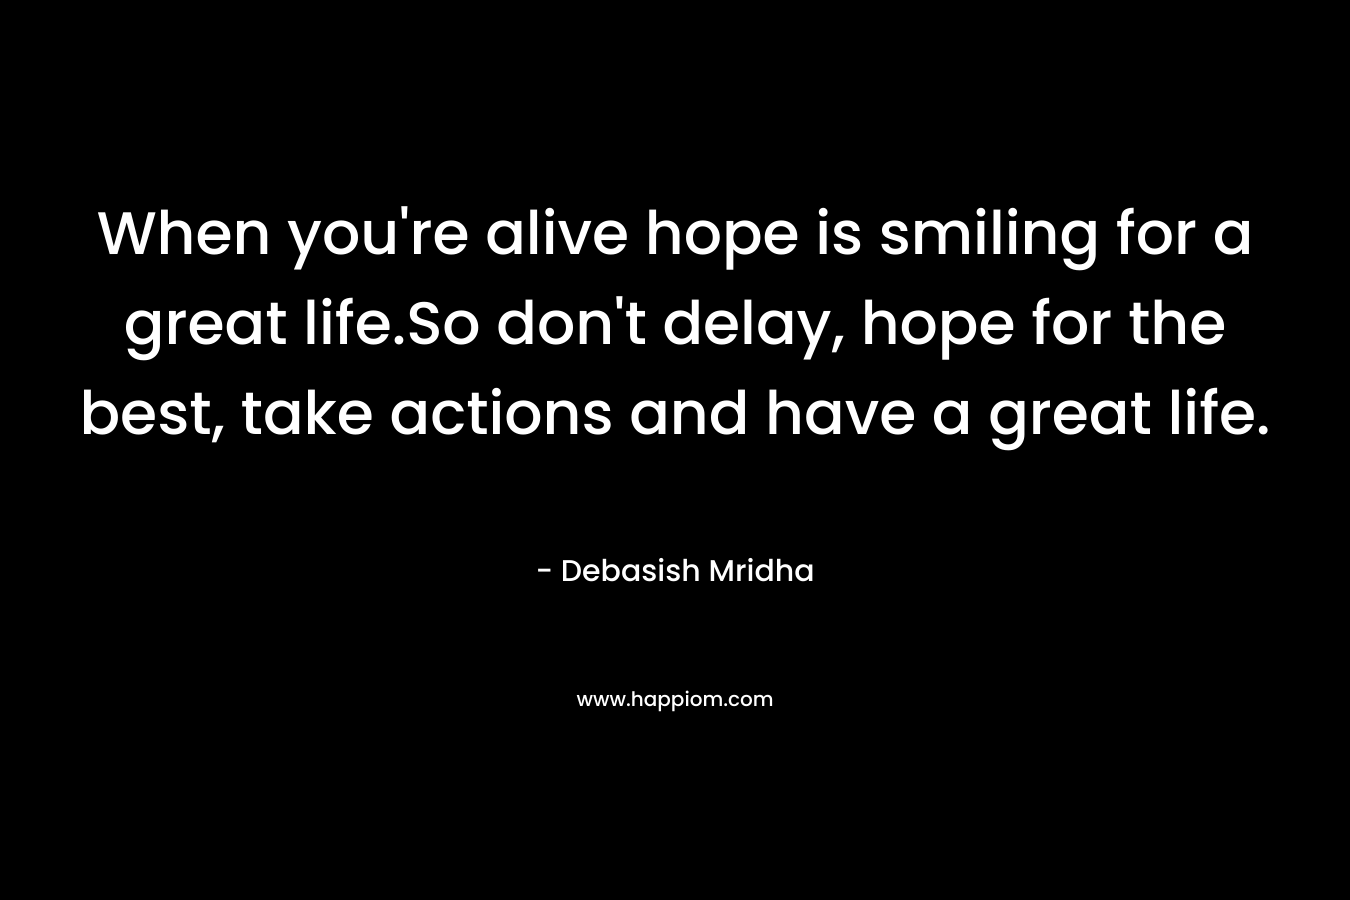 When you're alive hope is smiling for a great life.So don't delay, hope for the best, take actions and have a great life.